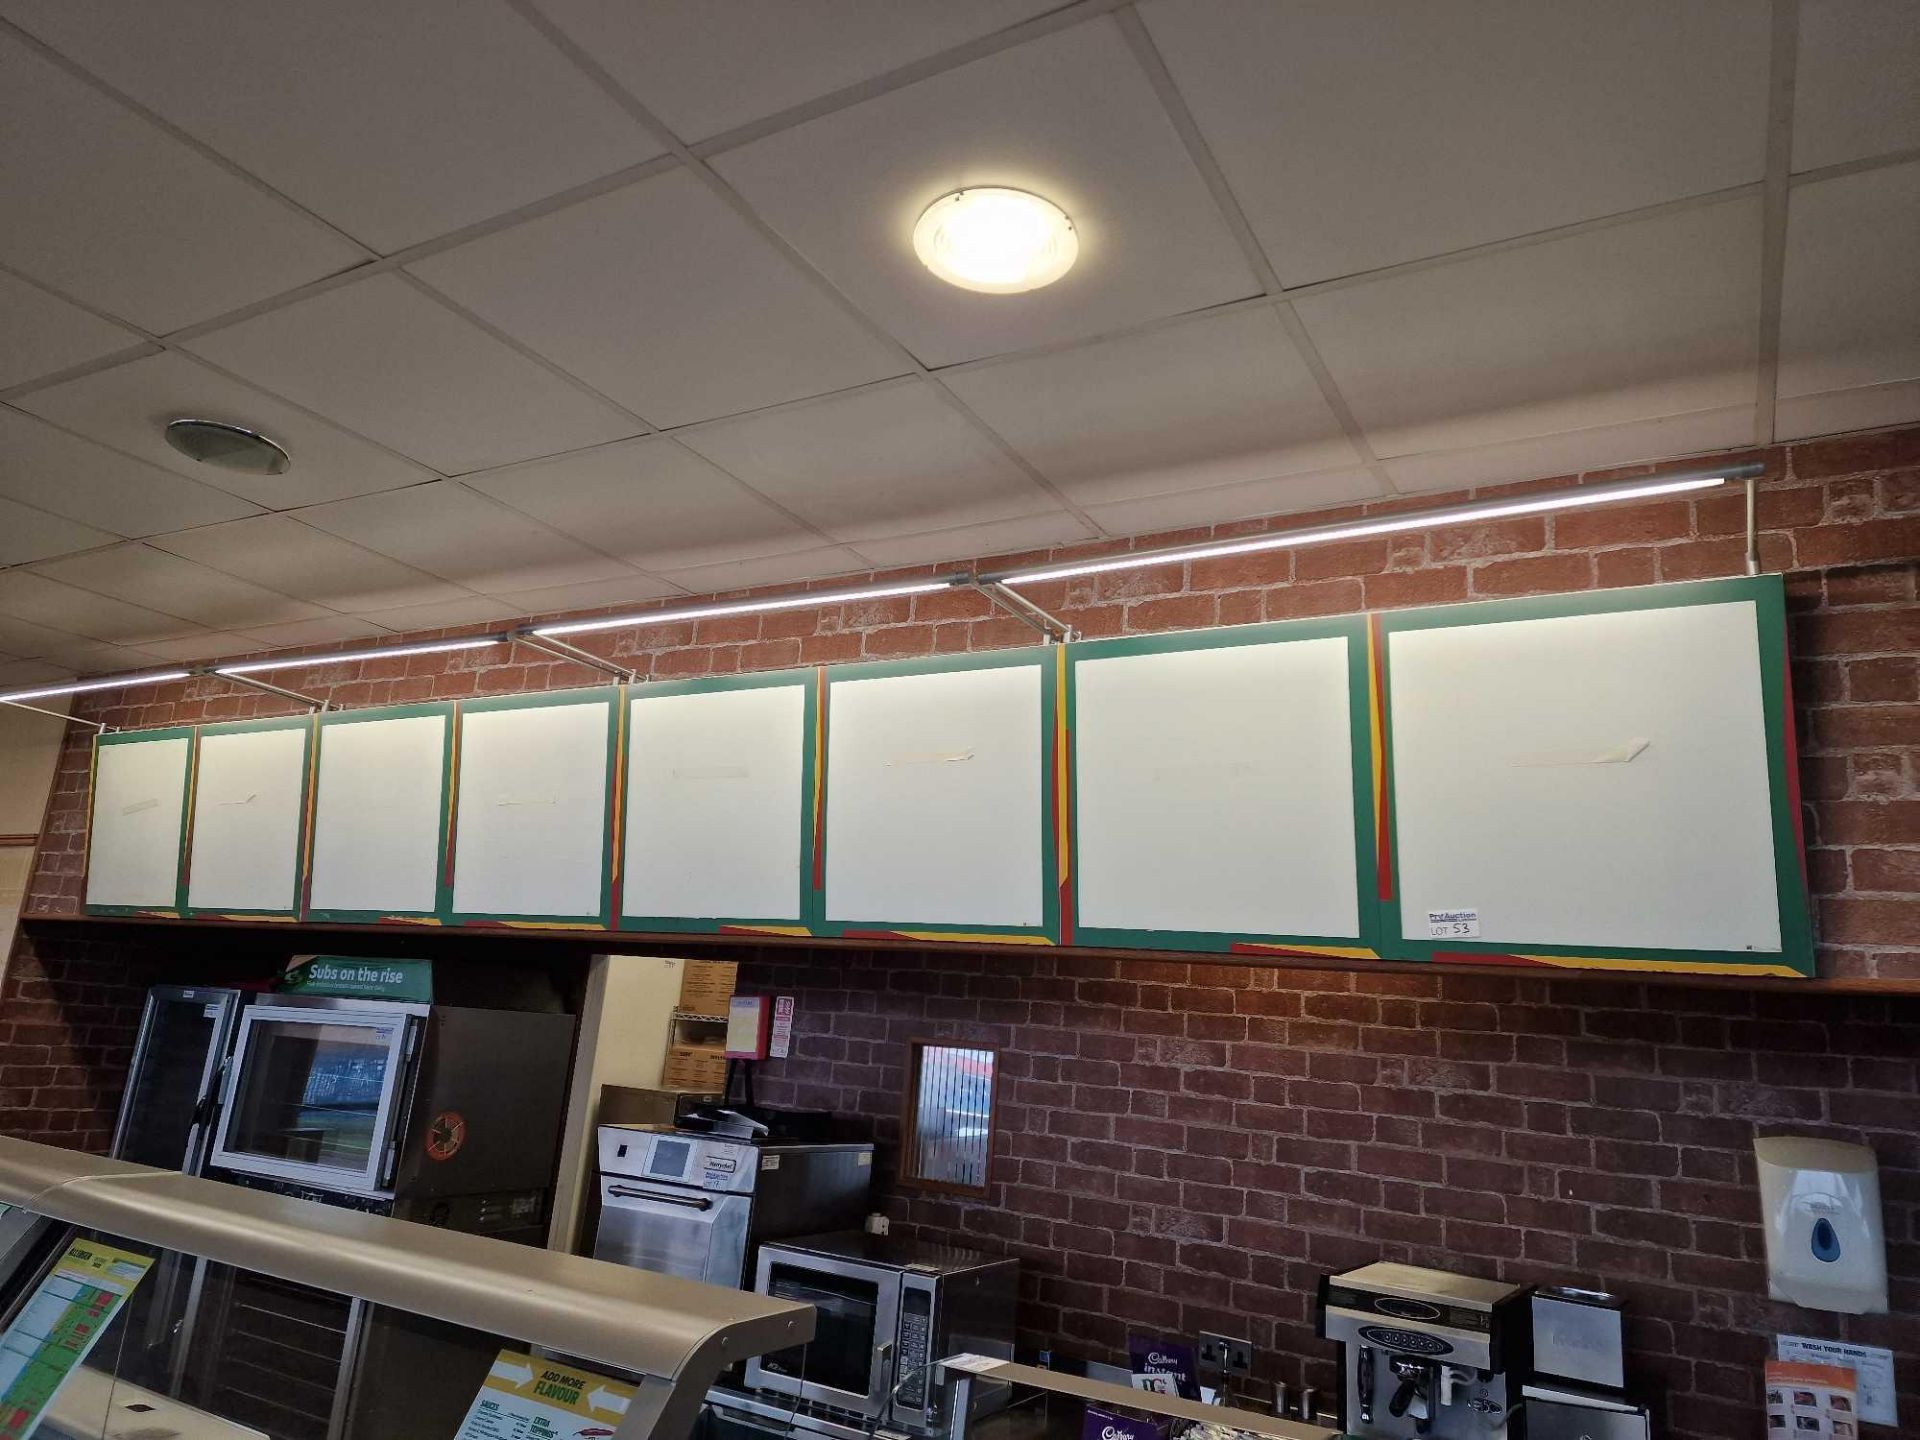 8 Station illuminated wall mounted menu display boards spans overall 5000 x 620mm